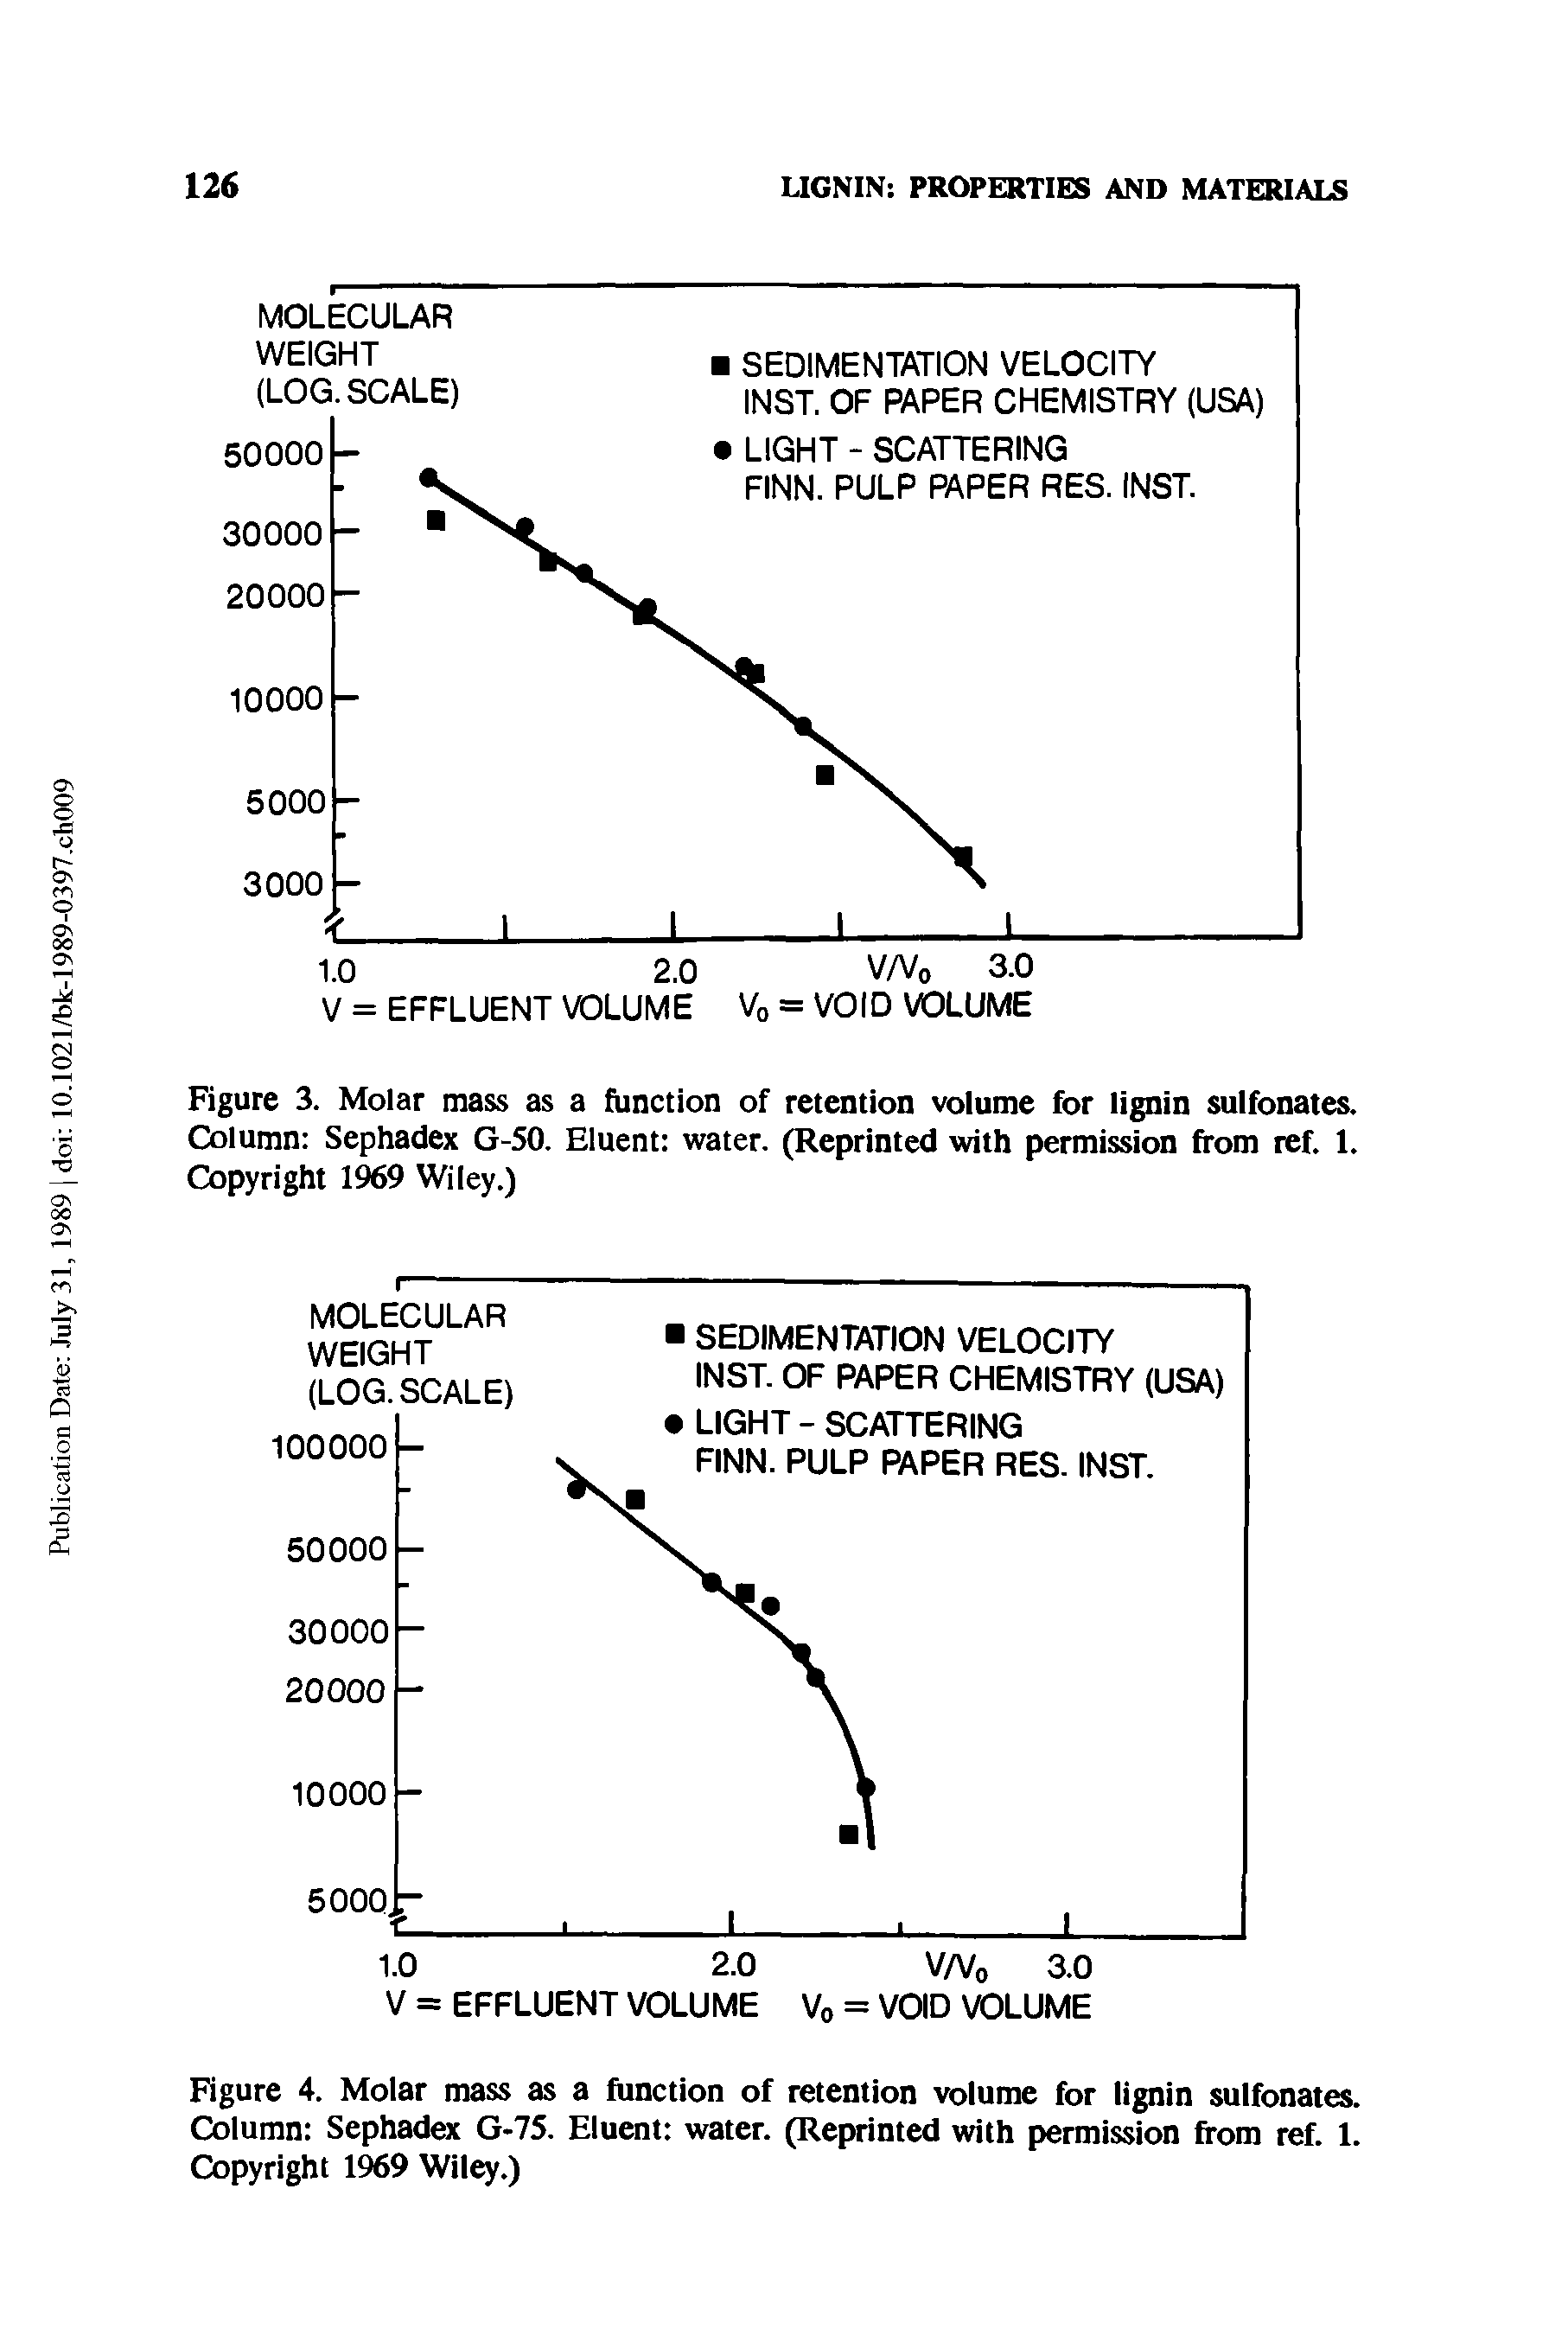 Figure 3. Molar mass as a function of retention volume for lignin sulfonates. Column Sephadex G-50. Eluent water. (Reprinted with permission from ref. 1. Copyright 1969 Wiley.)...